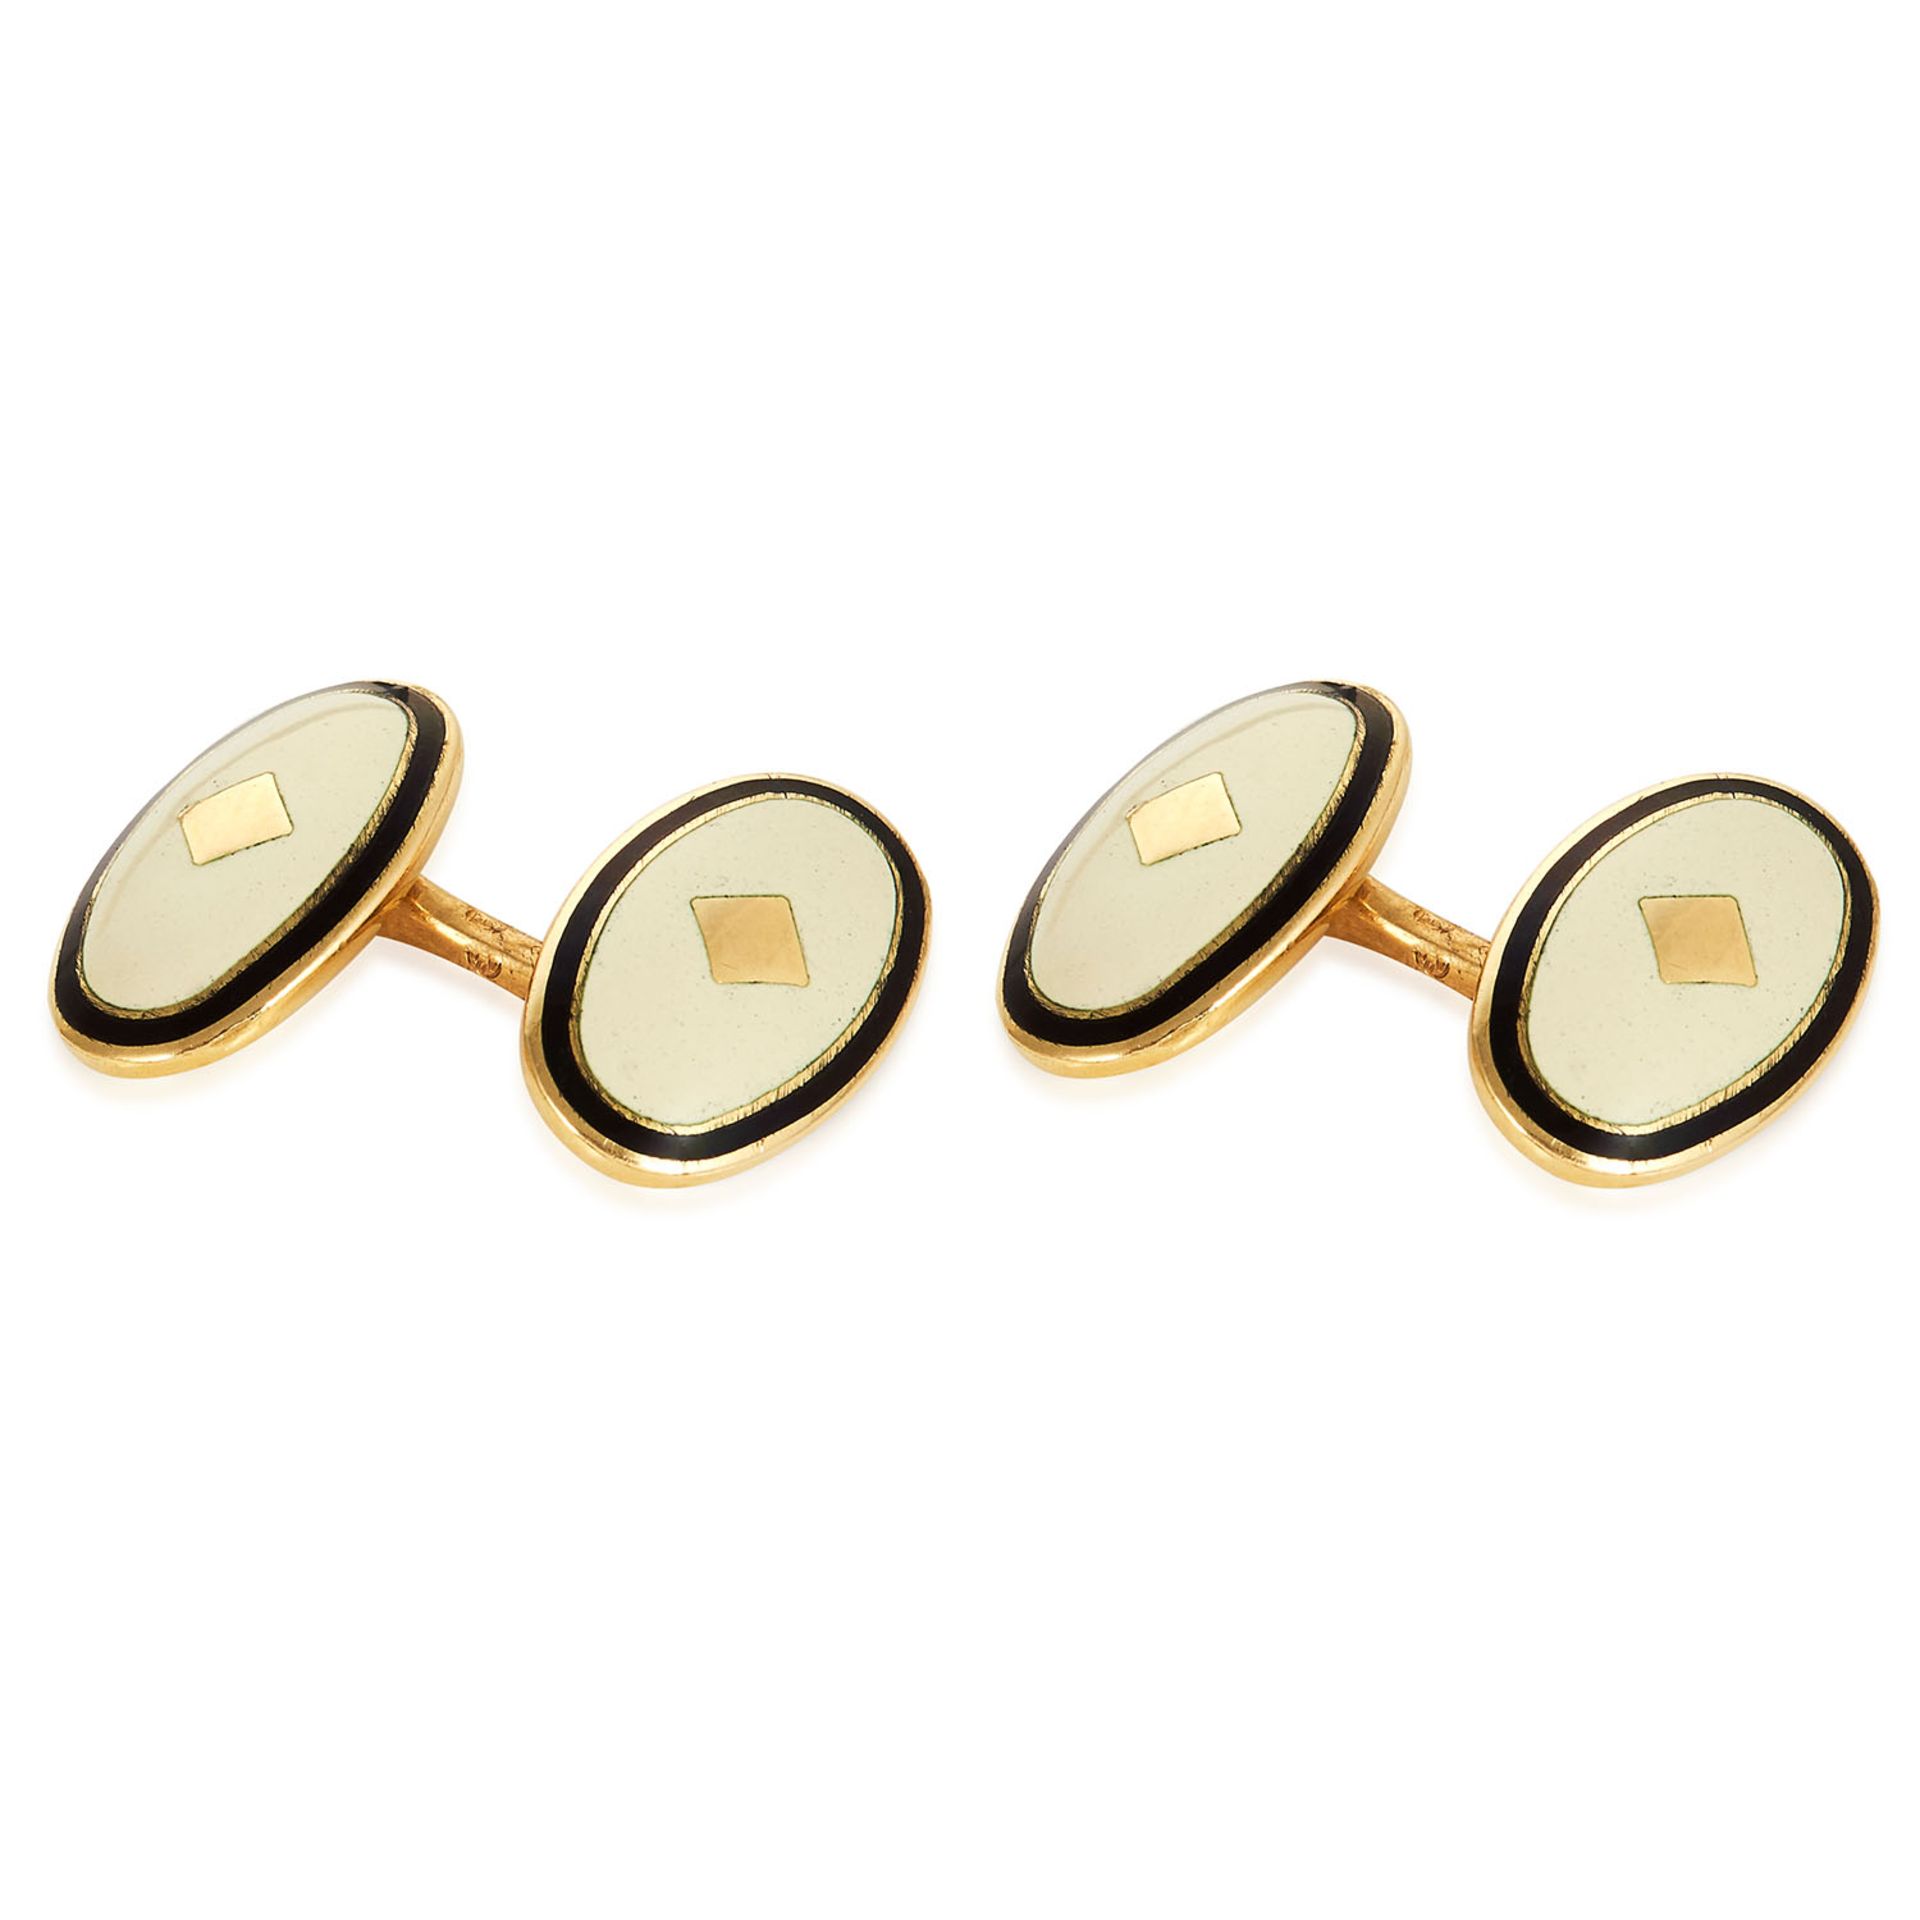 A PAIR OF VINTAGE BLACK AND WHITE ENAMEL CUFFLINKS in 18ct yellow gold, each formed of two oval